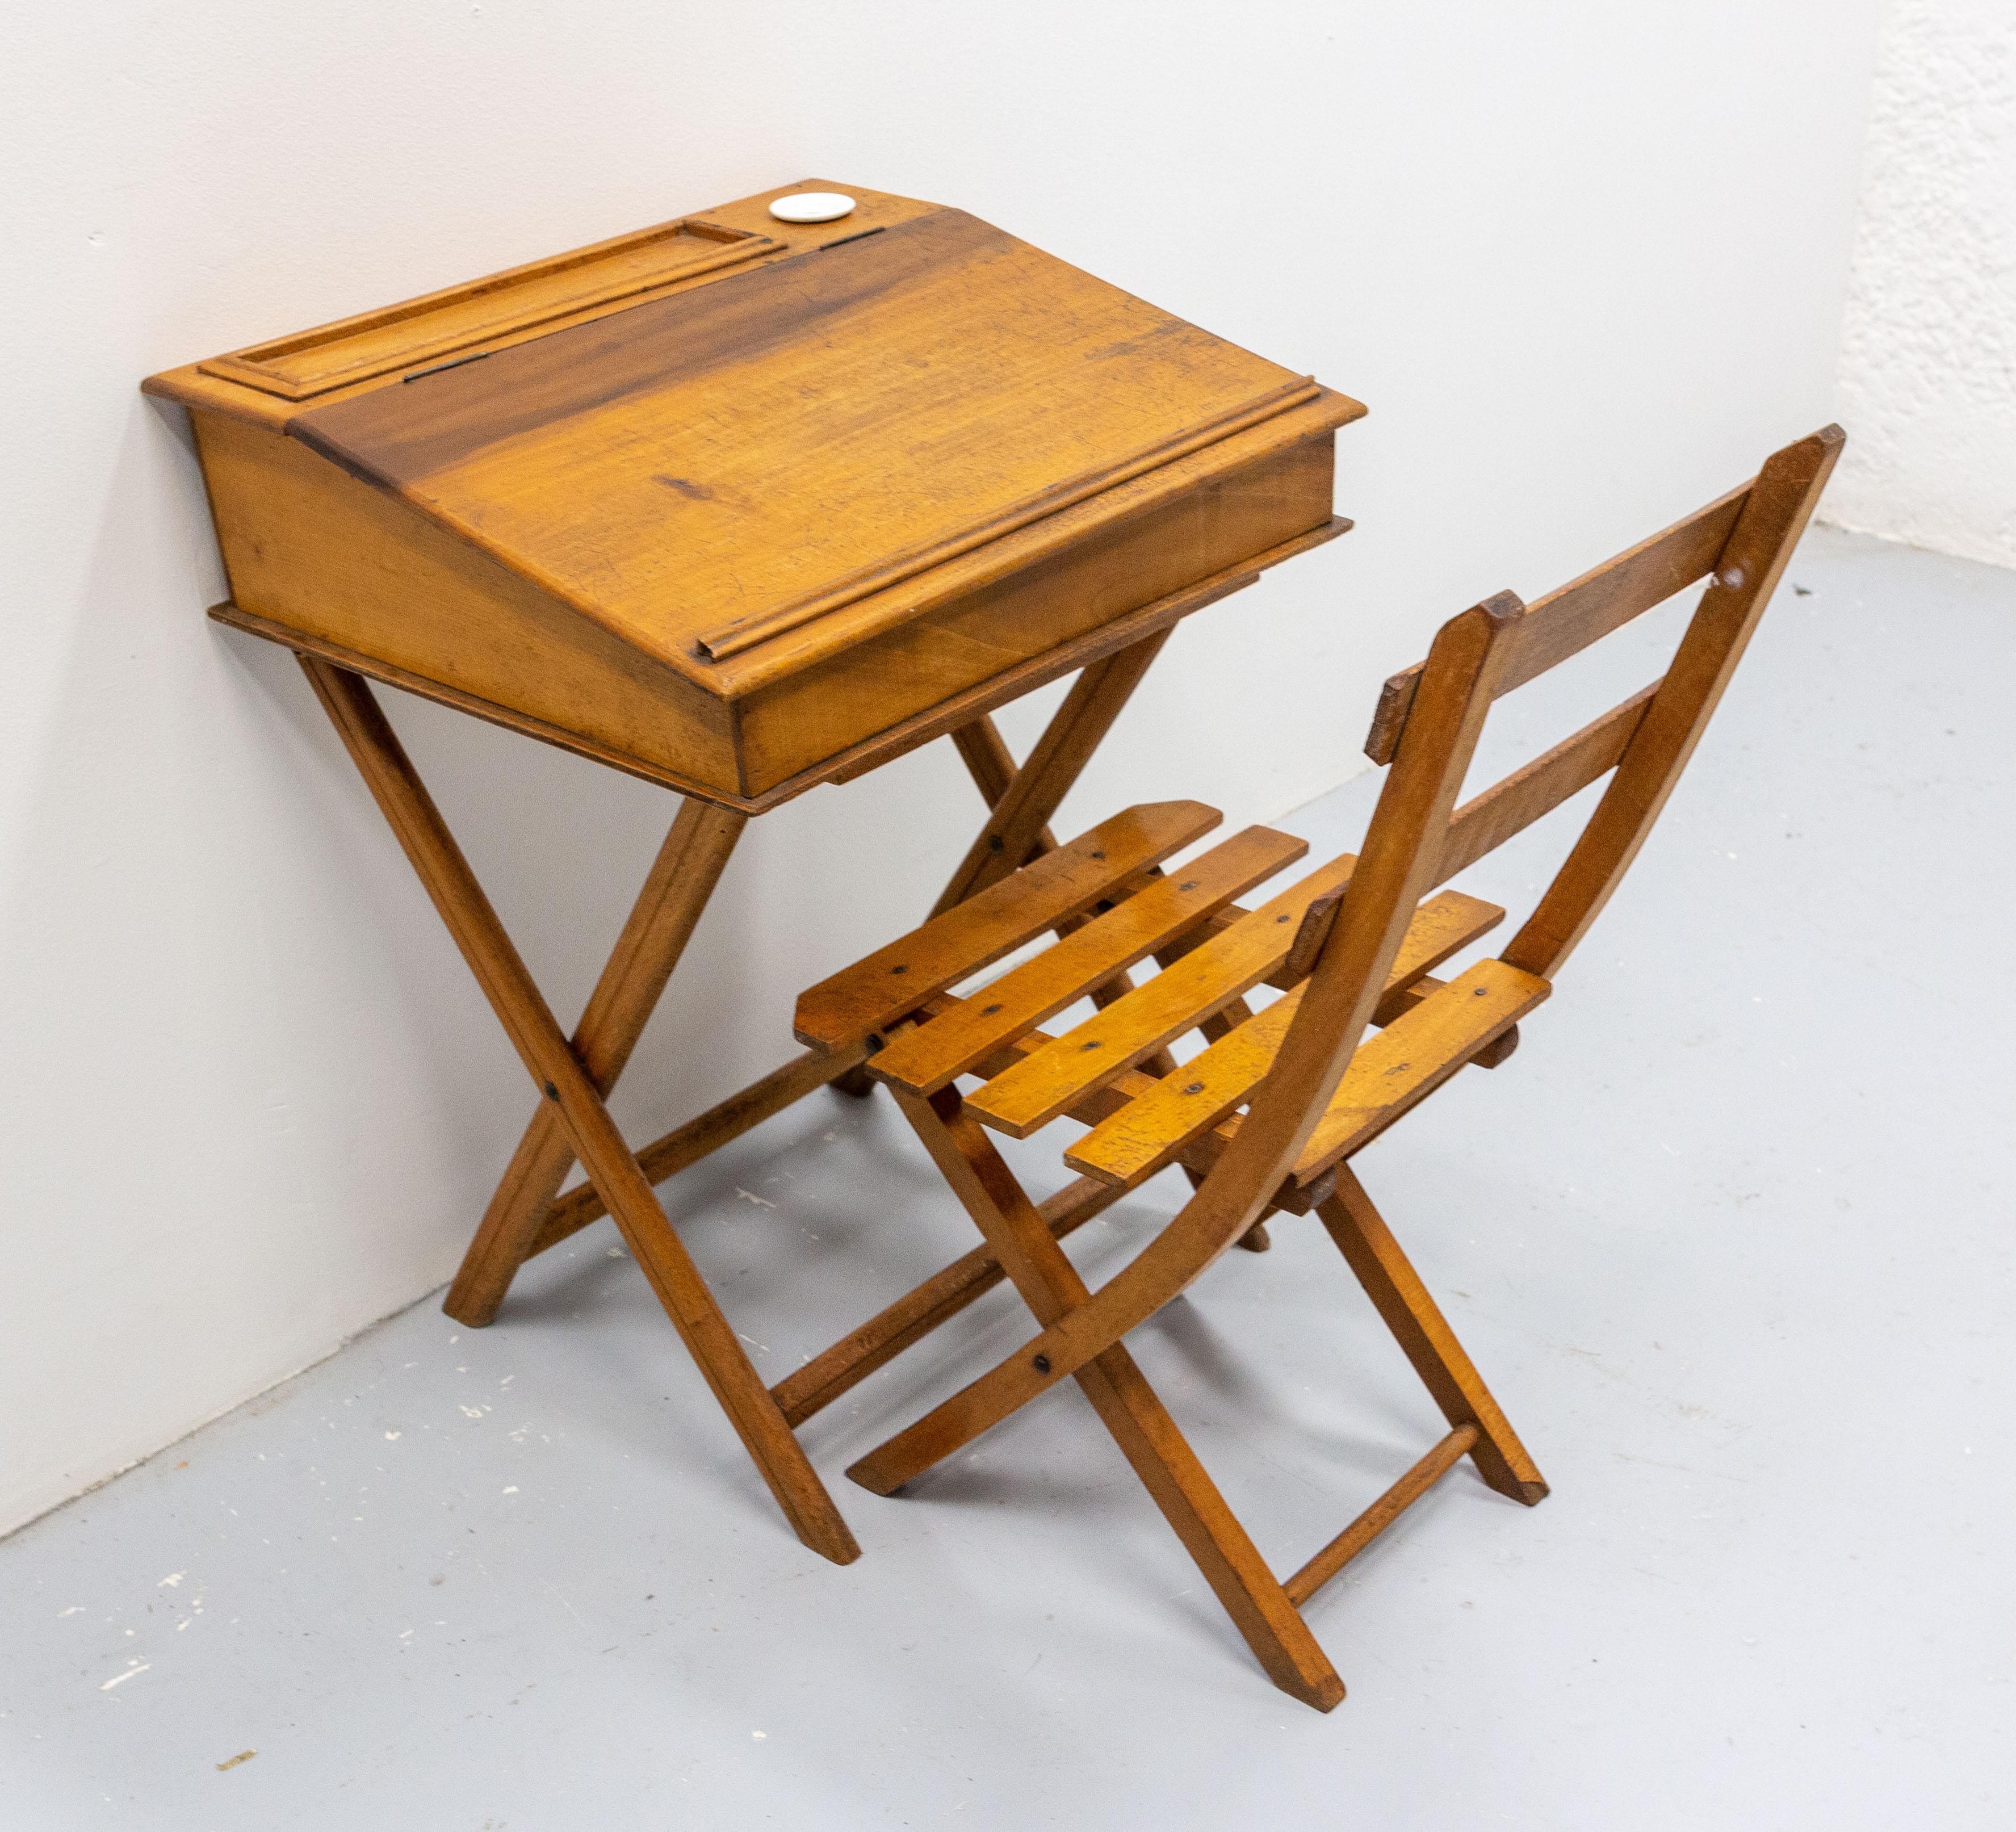 French slant top desk writing table and its chair, circa 1950.
Foldable beech pupitre for child and its ceramic inkwell 
Good vintage condition with nice patina.
dimension of the chair:
D: 16.14 in., L: 12.79 in. H: 25.59 in. (41/32.5/65